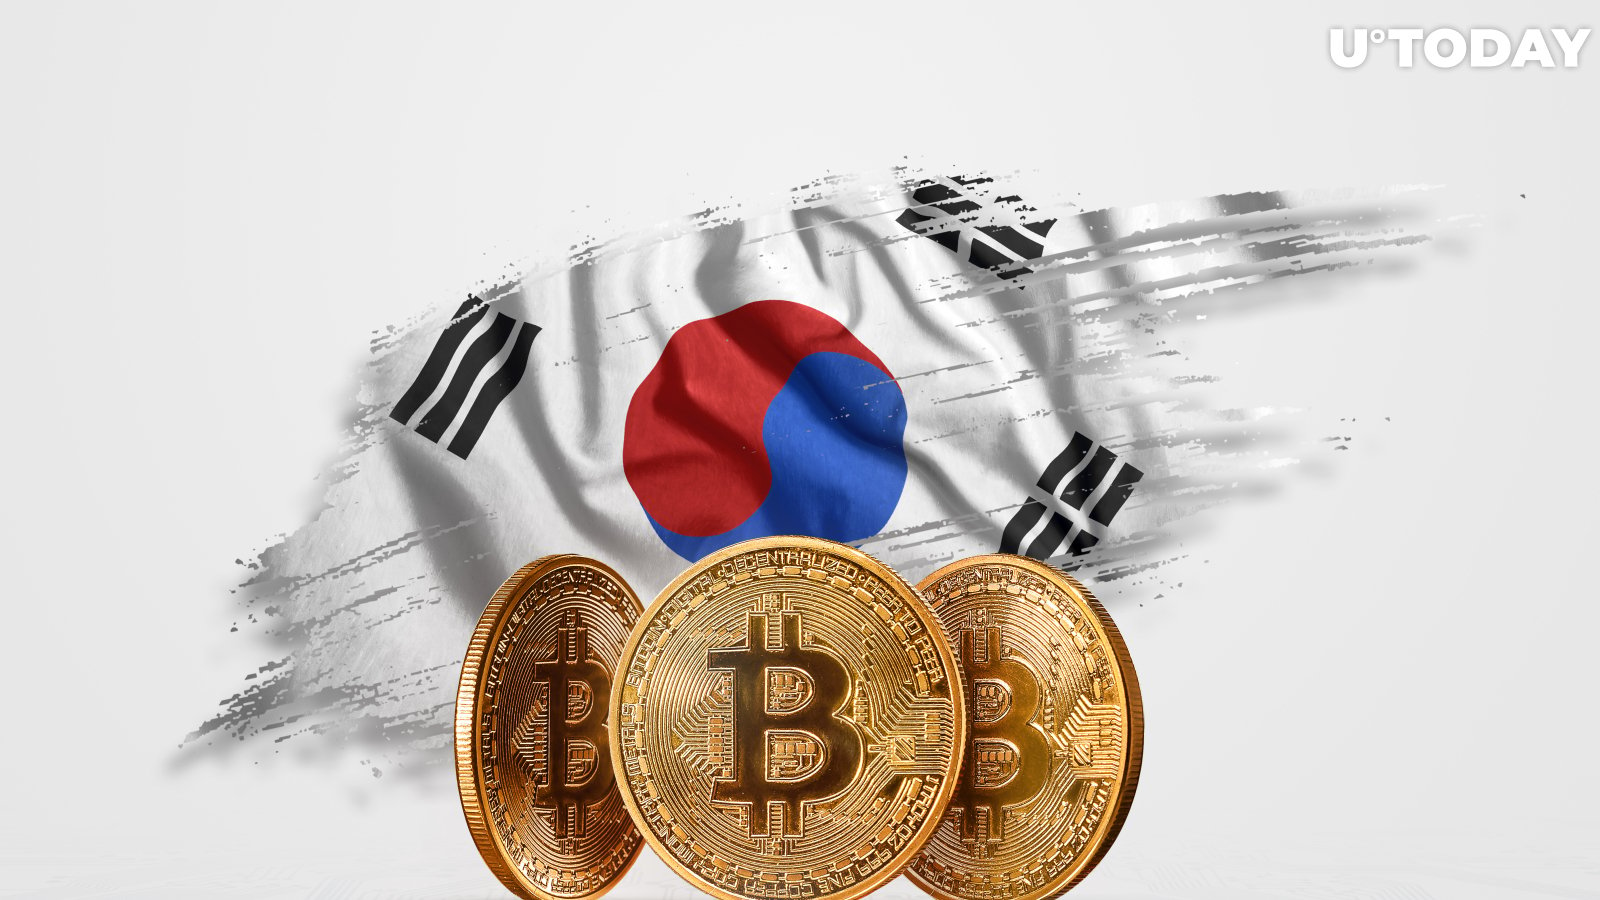 Ripple to Go Public, First South Korean ETF, Facebook's Bitcoins: This Day in Crypto